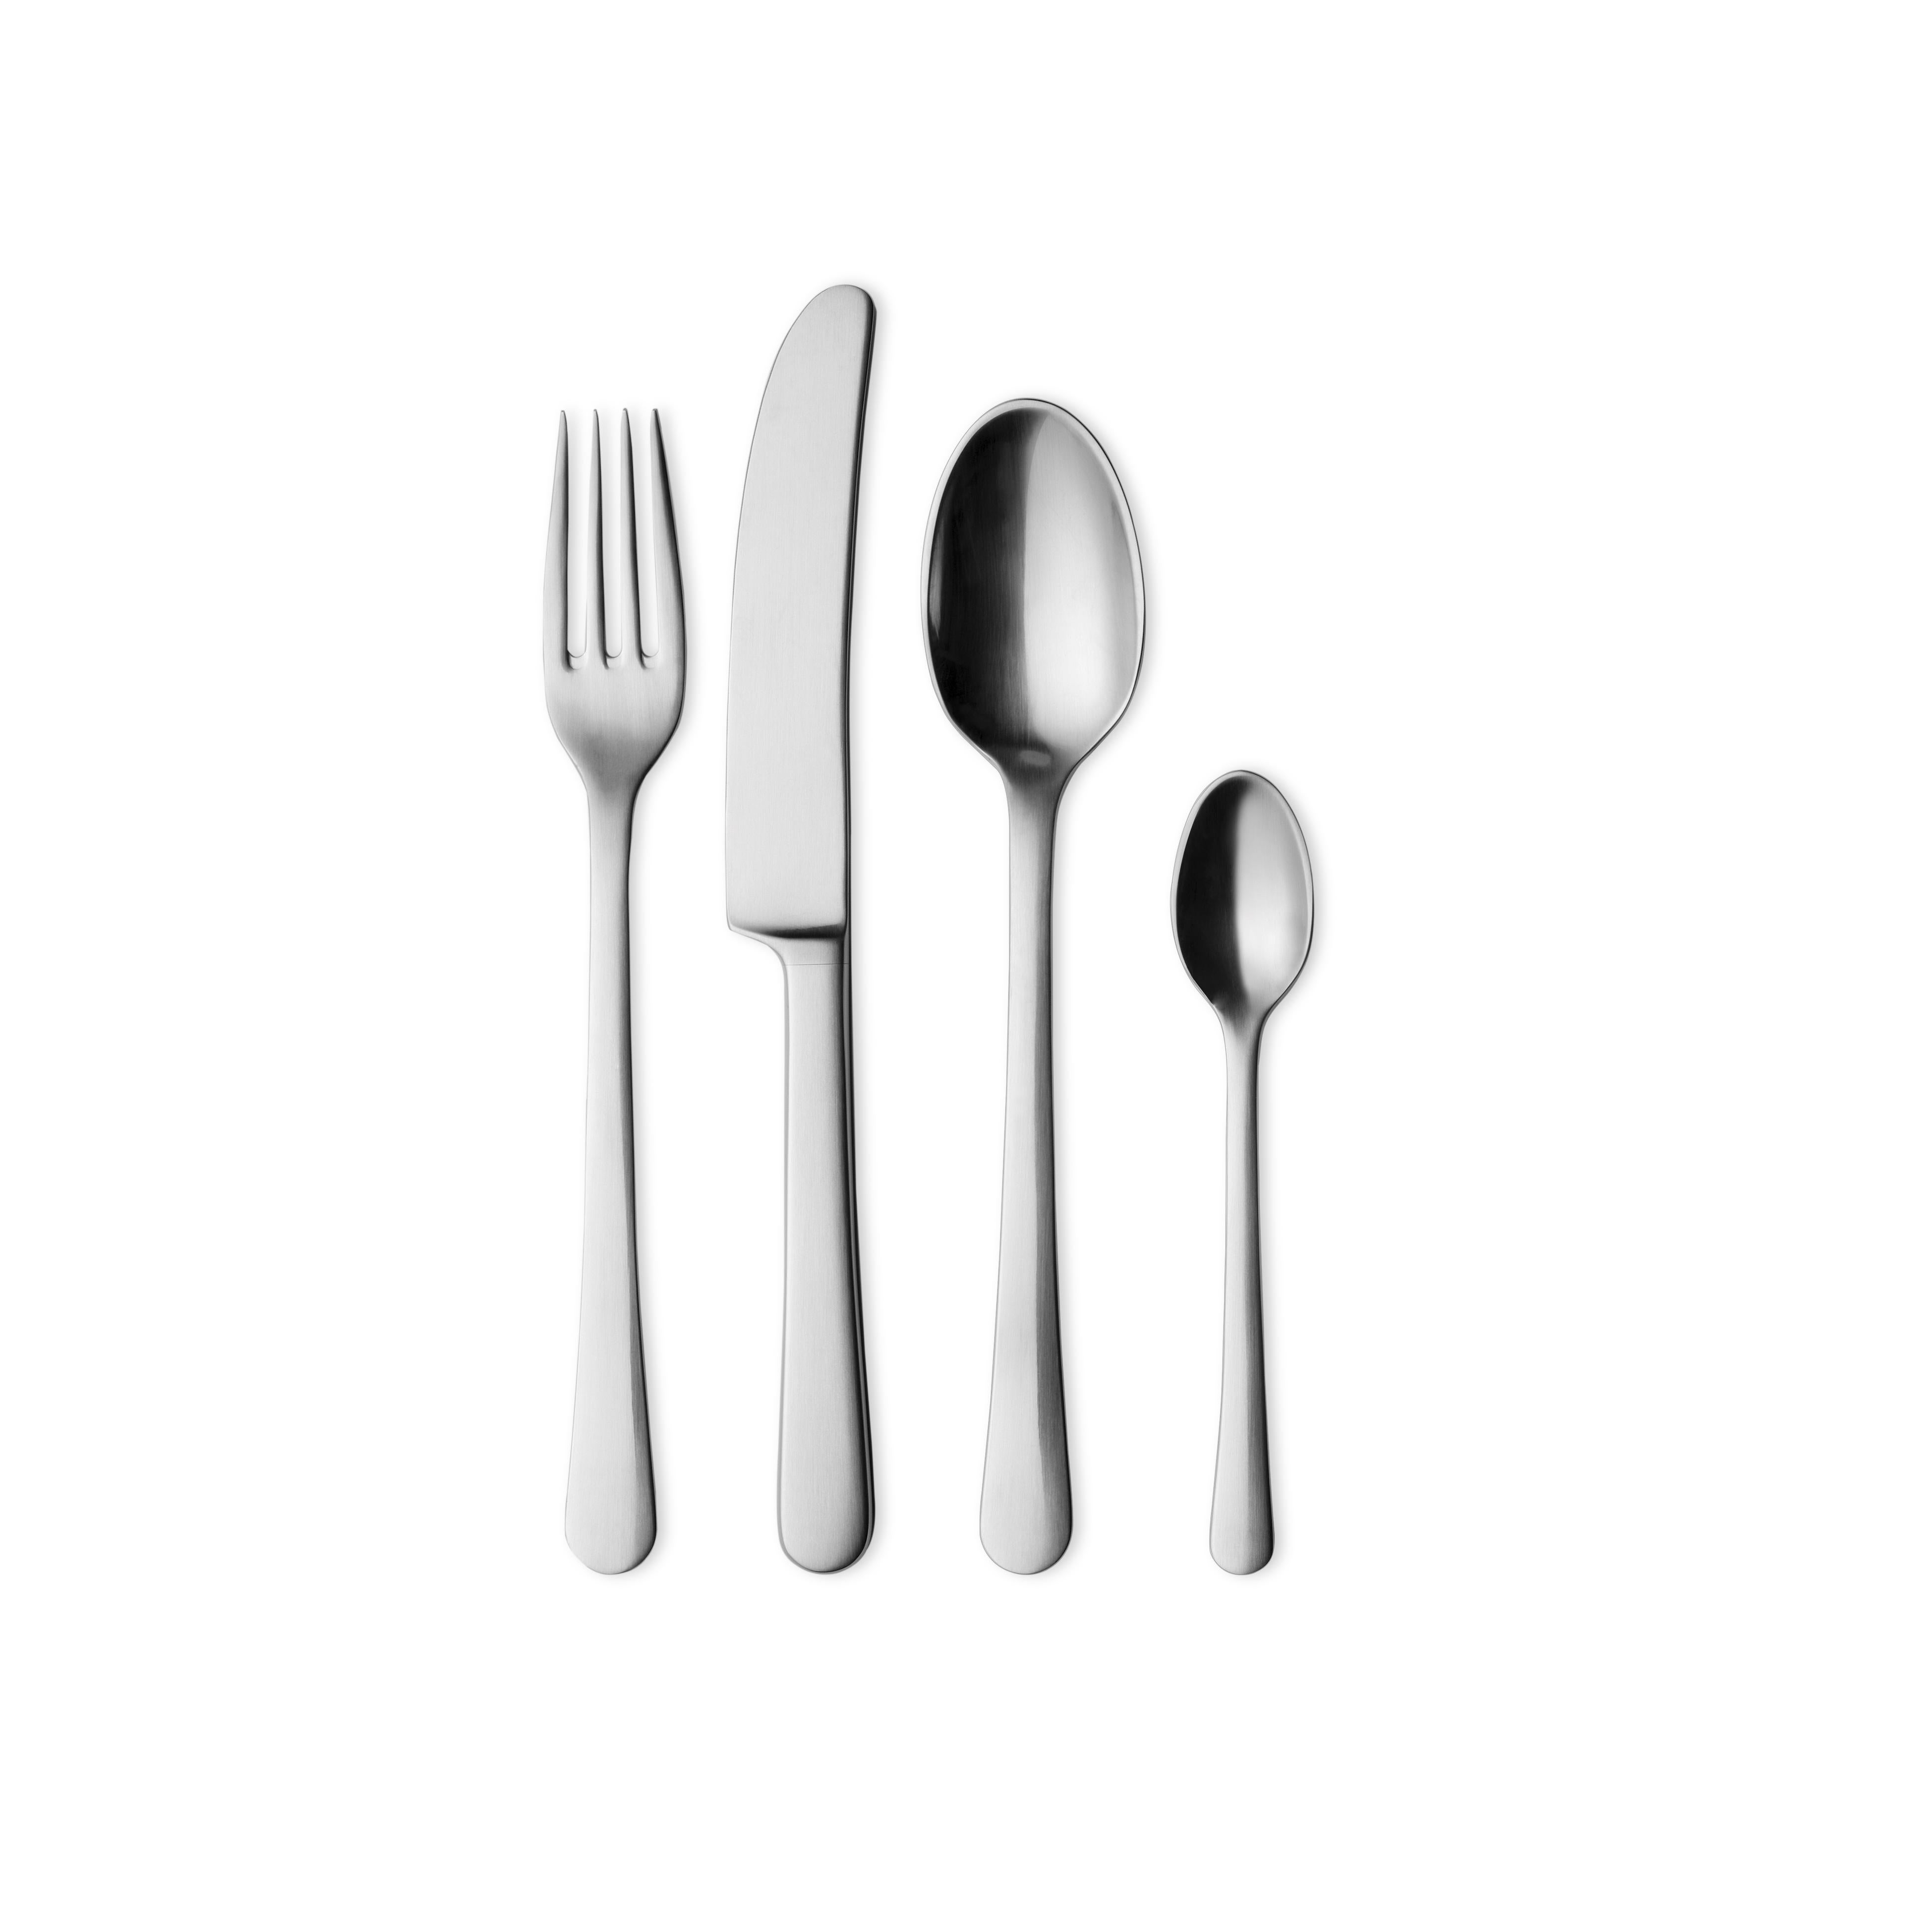 Matte stainless steel cutlery giftbox with: dinner spoon, dinner fork, long grill dinner knife and tea spoon.